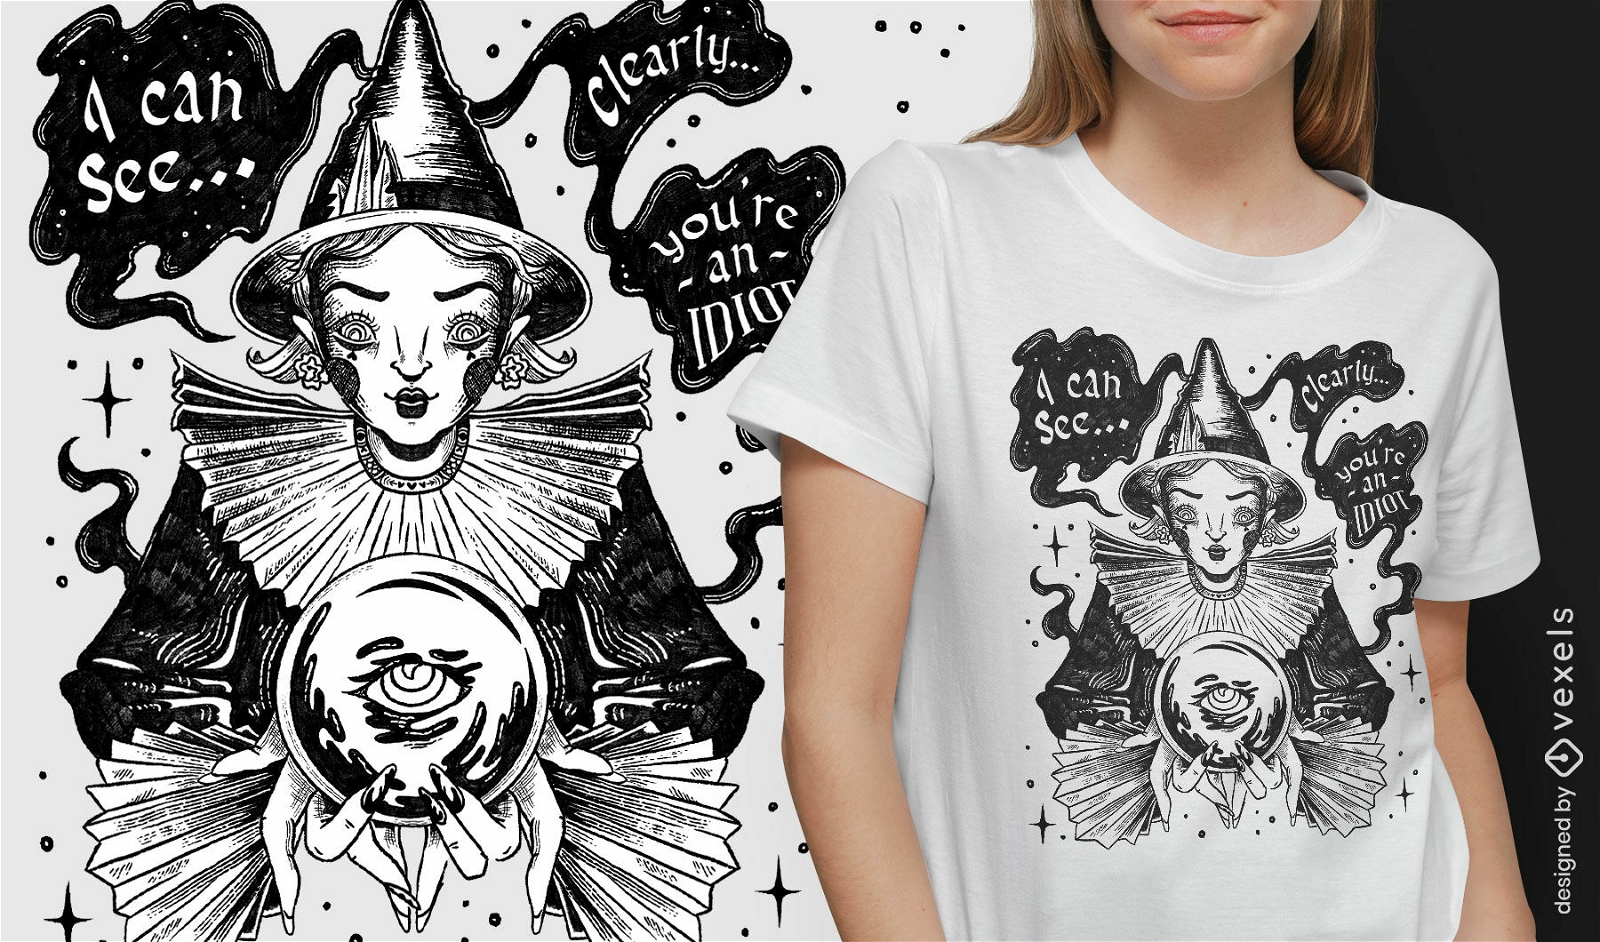 Crystal ball witch t-shirt design